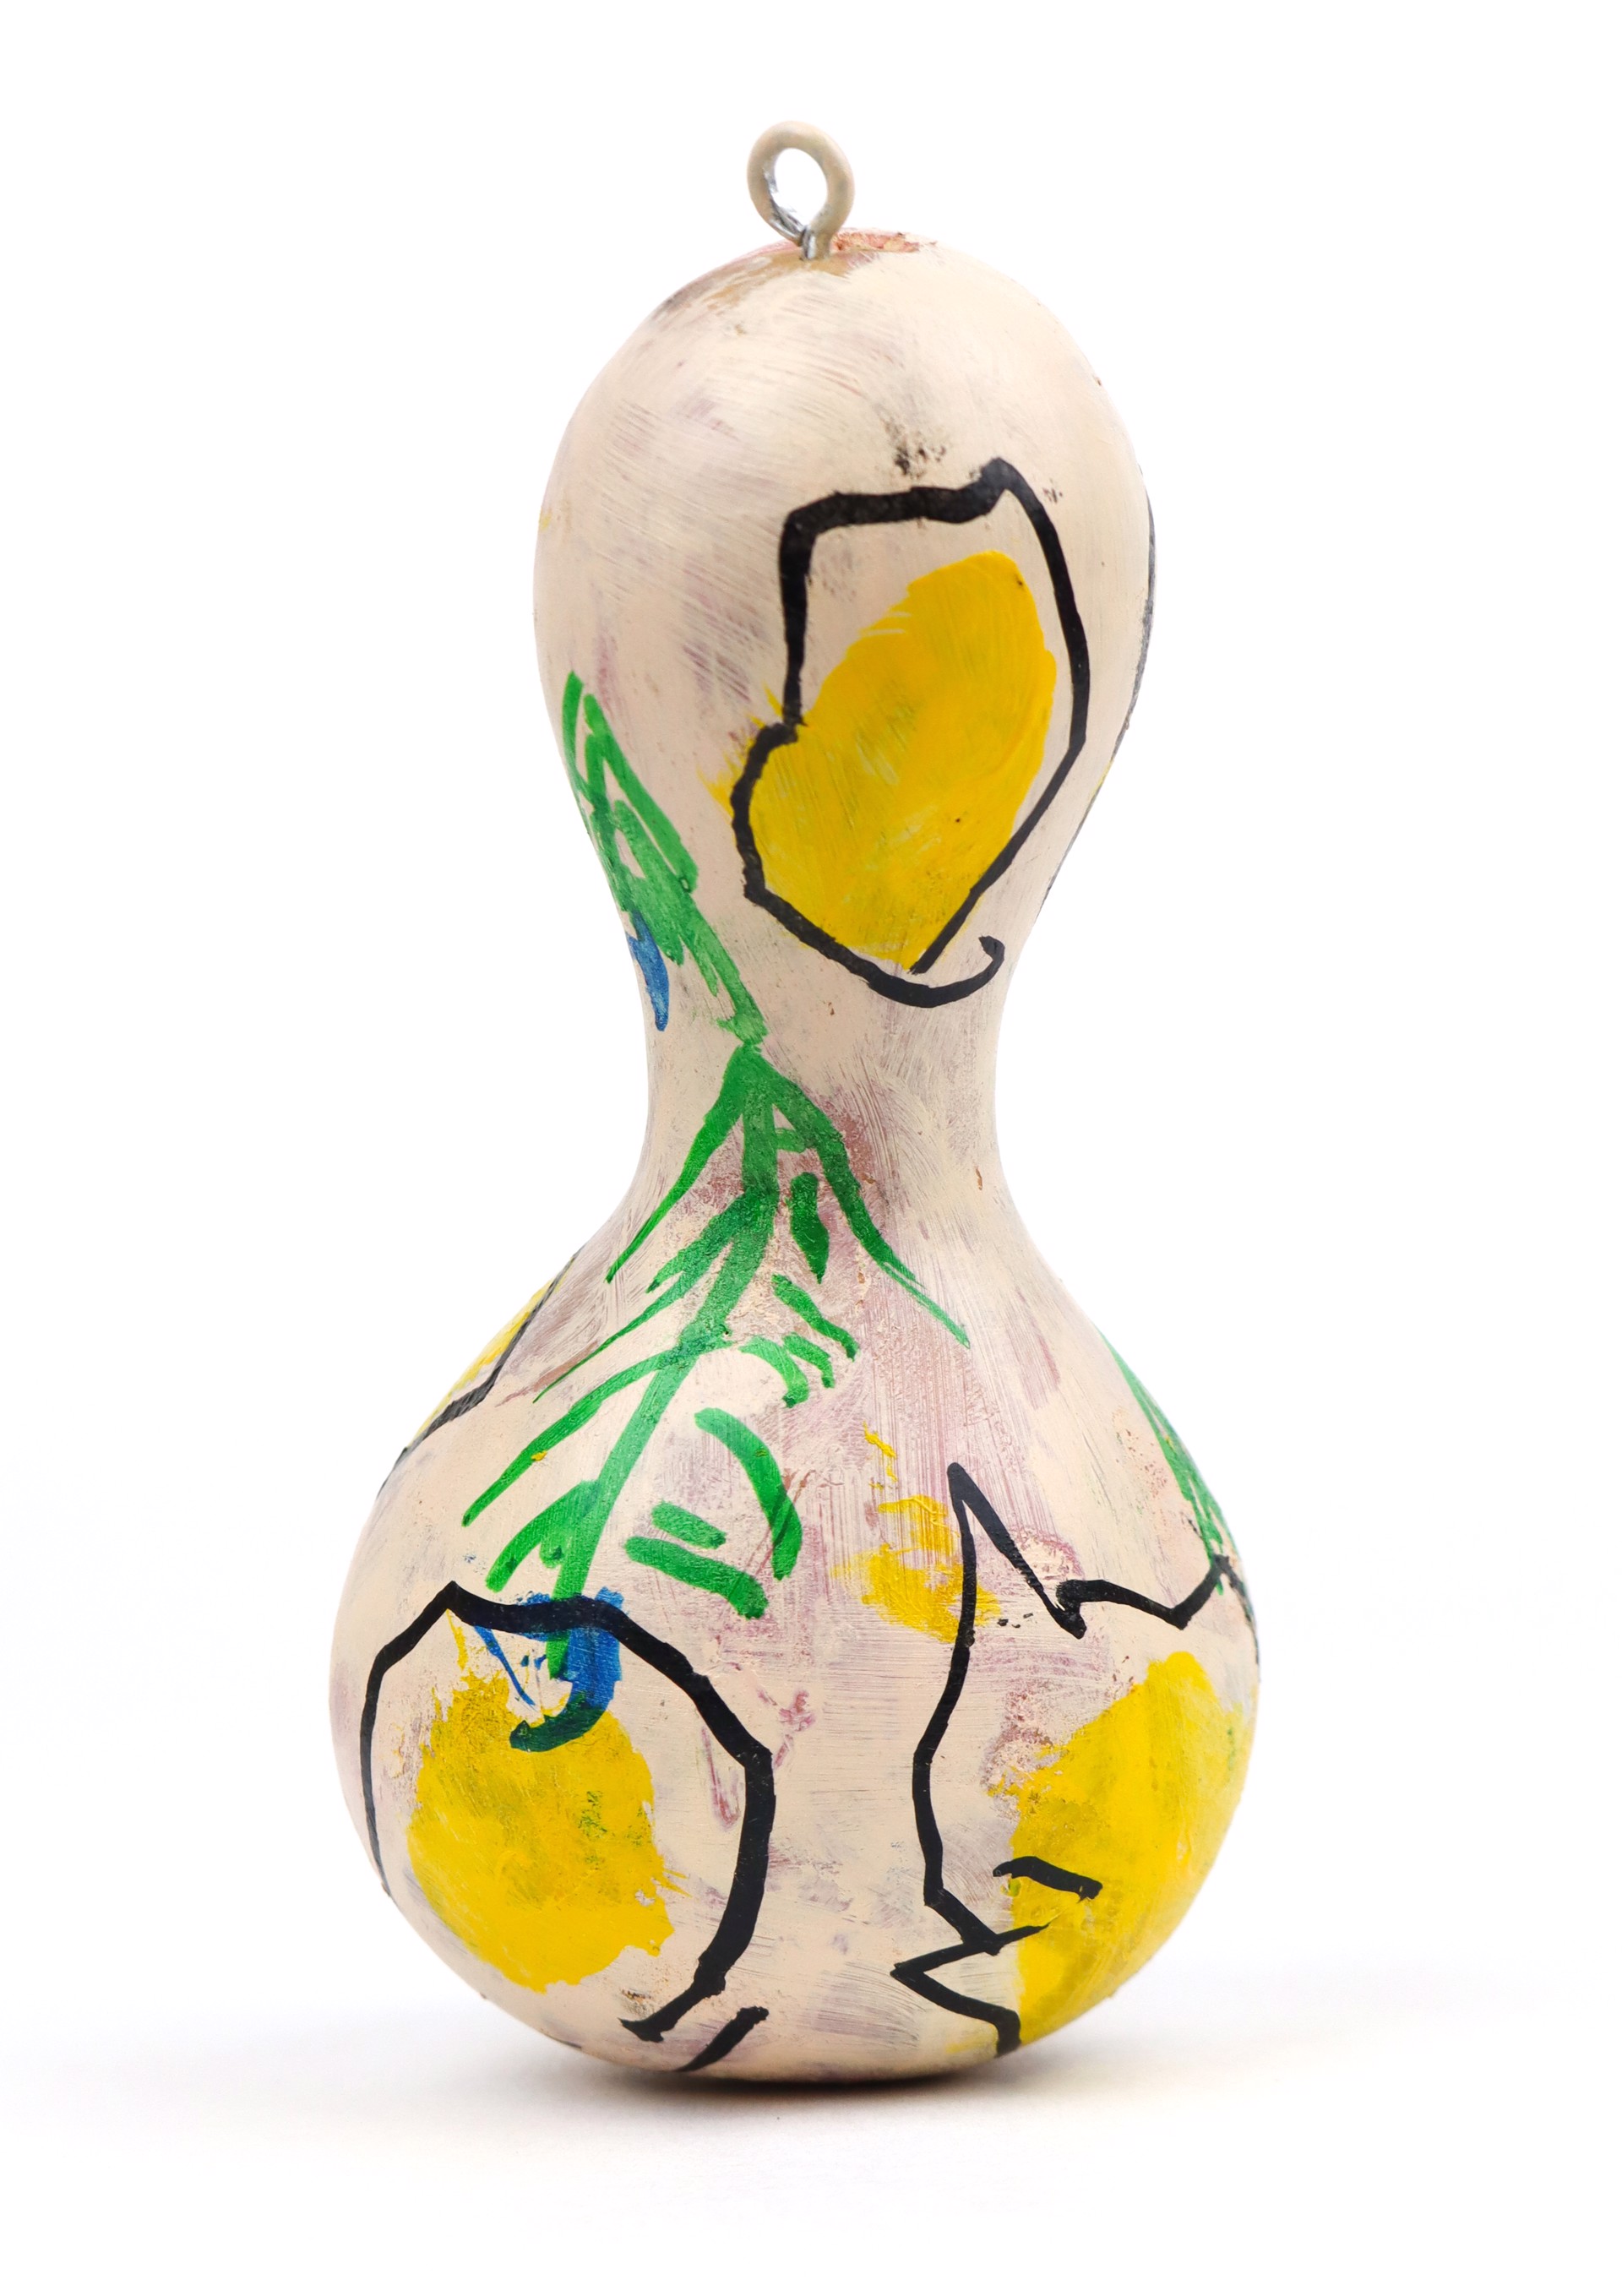 Abstract Christmas (gourd ornament) by Jay Bird